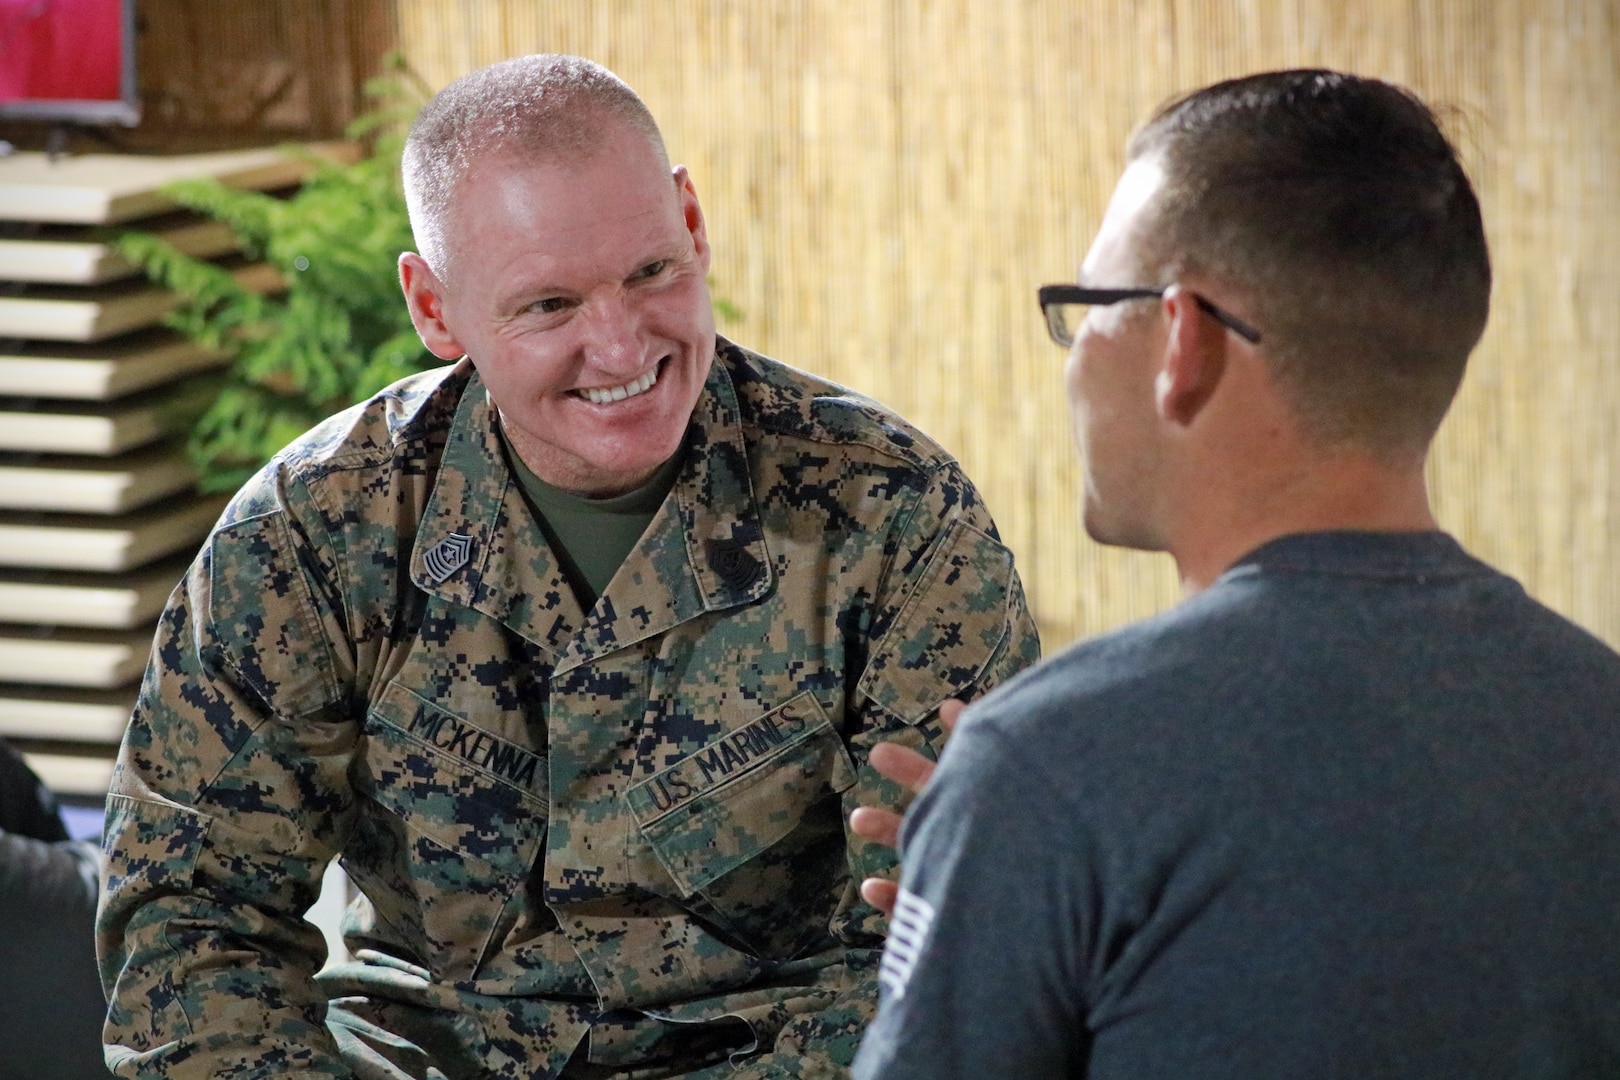 The United States Marine Corps is Changing. Why Should we Care? »